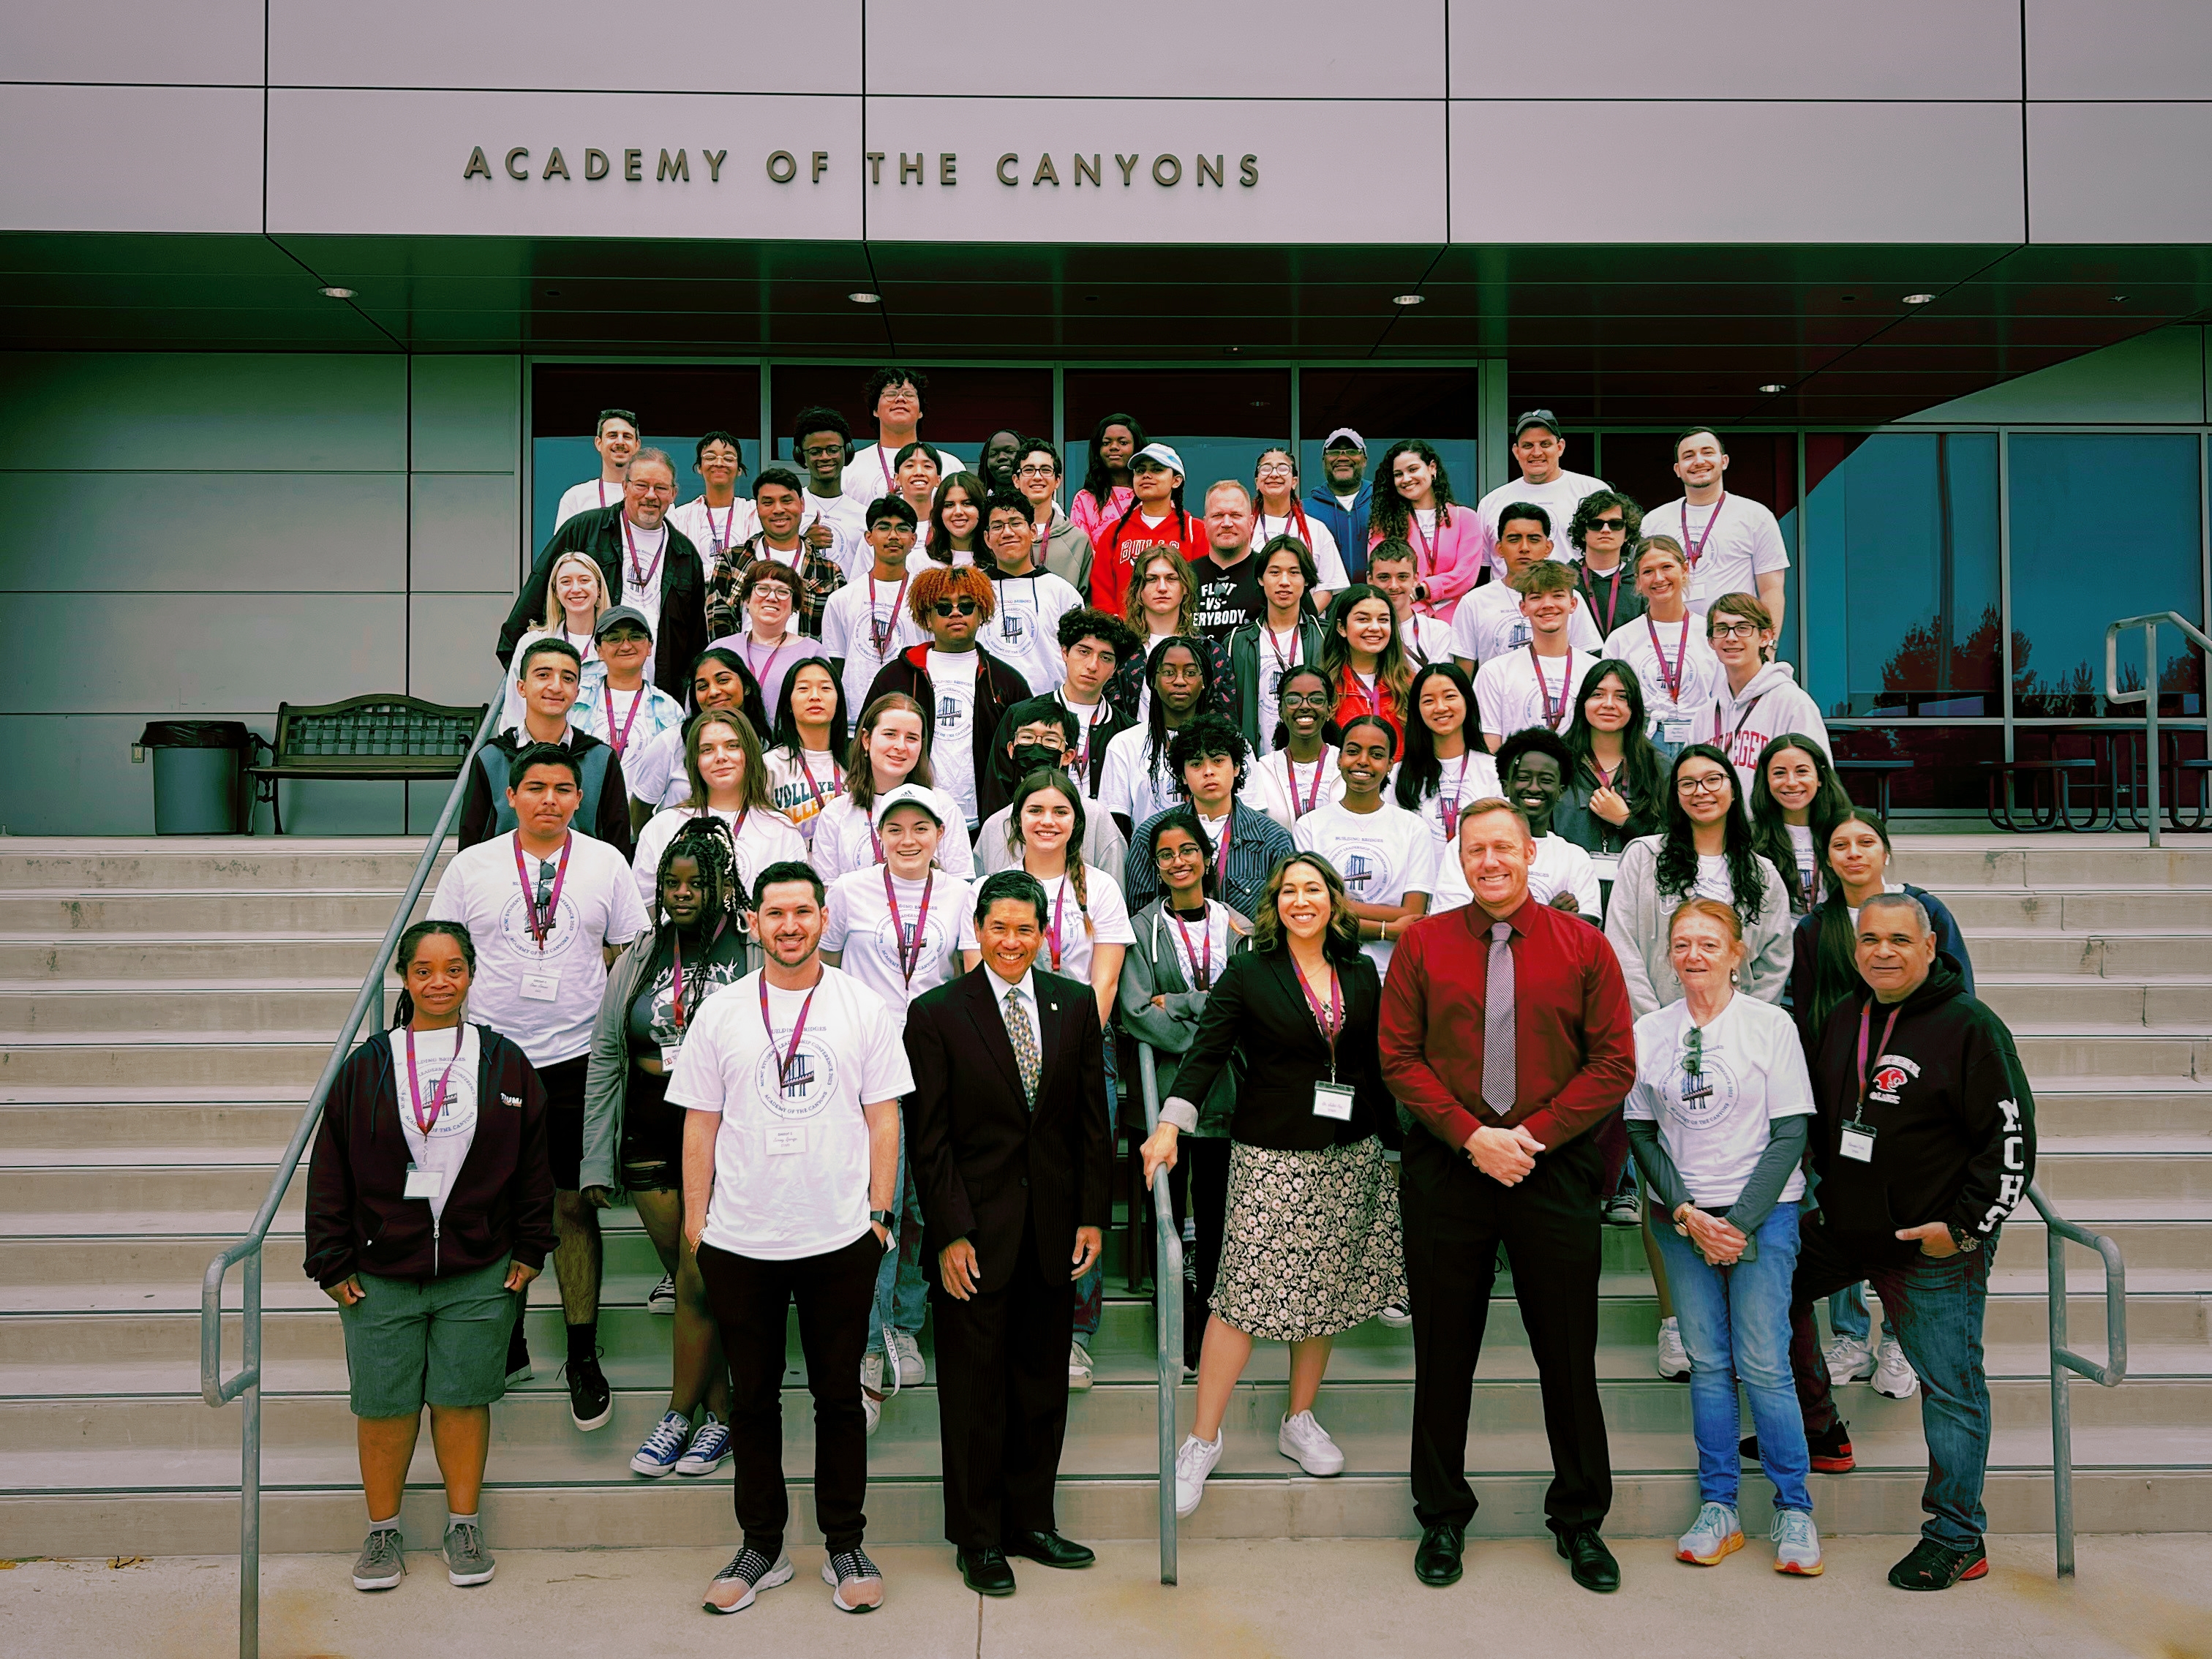 A photo of Ron Yee with students onthe steps of the Academy of the Canyons